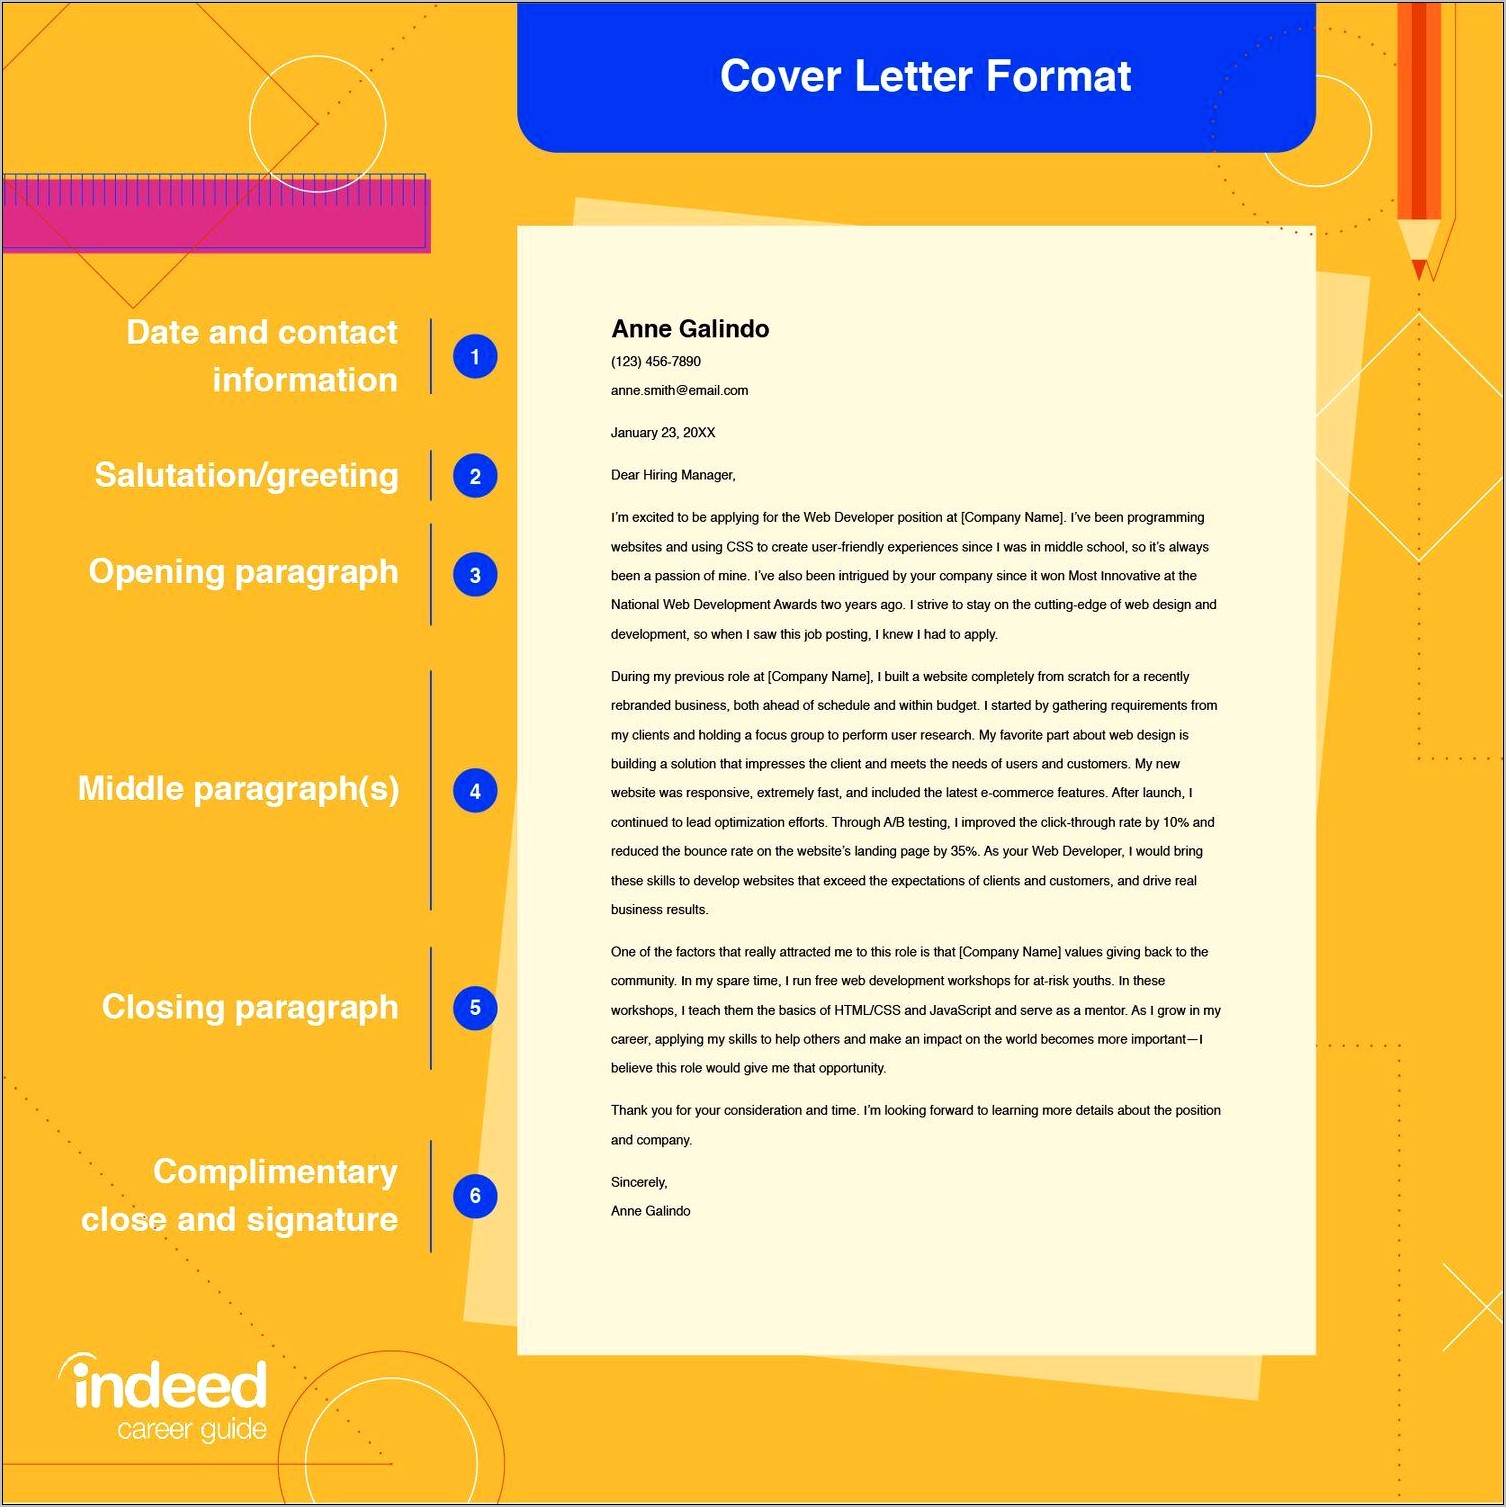 Send Resume And Cover Letter As Pdf